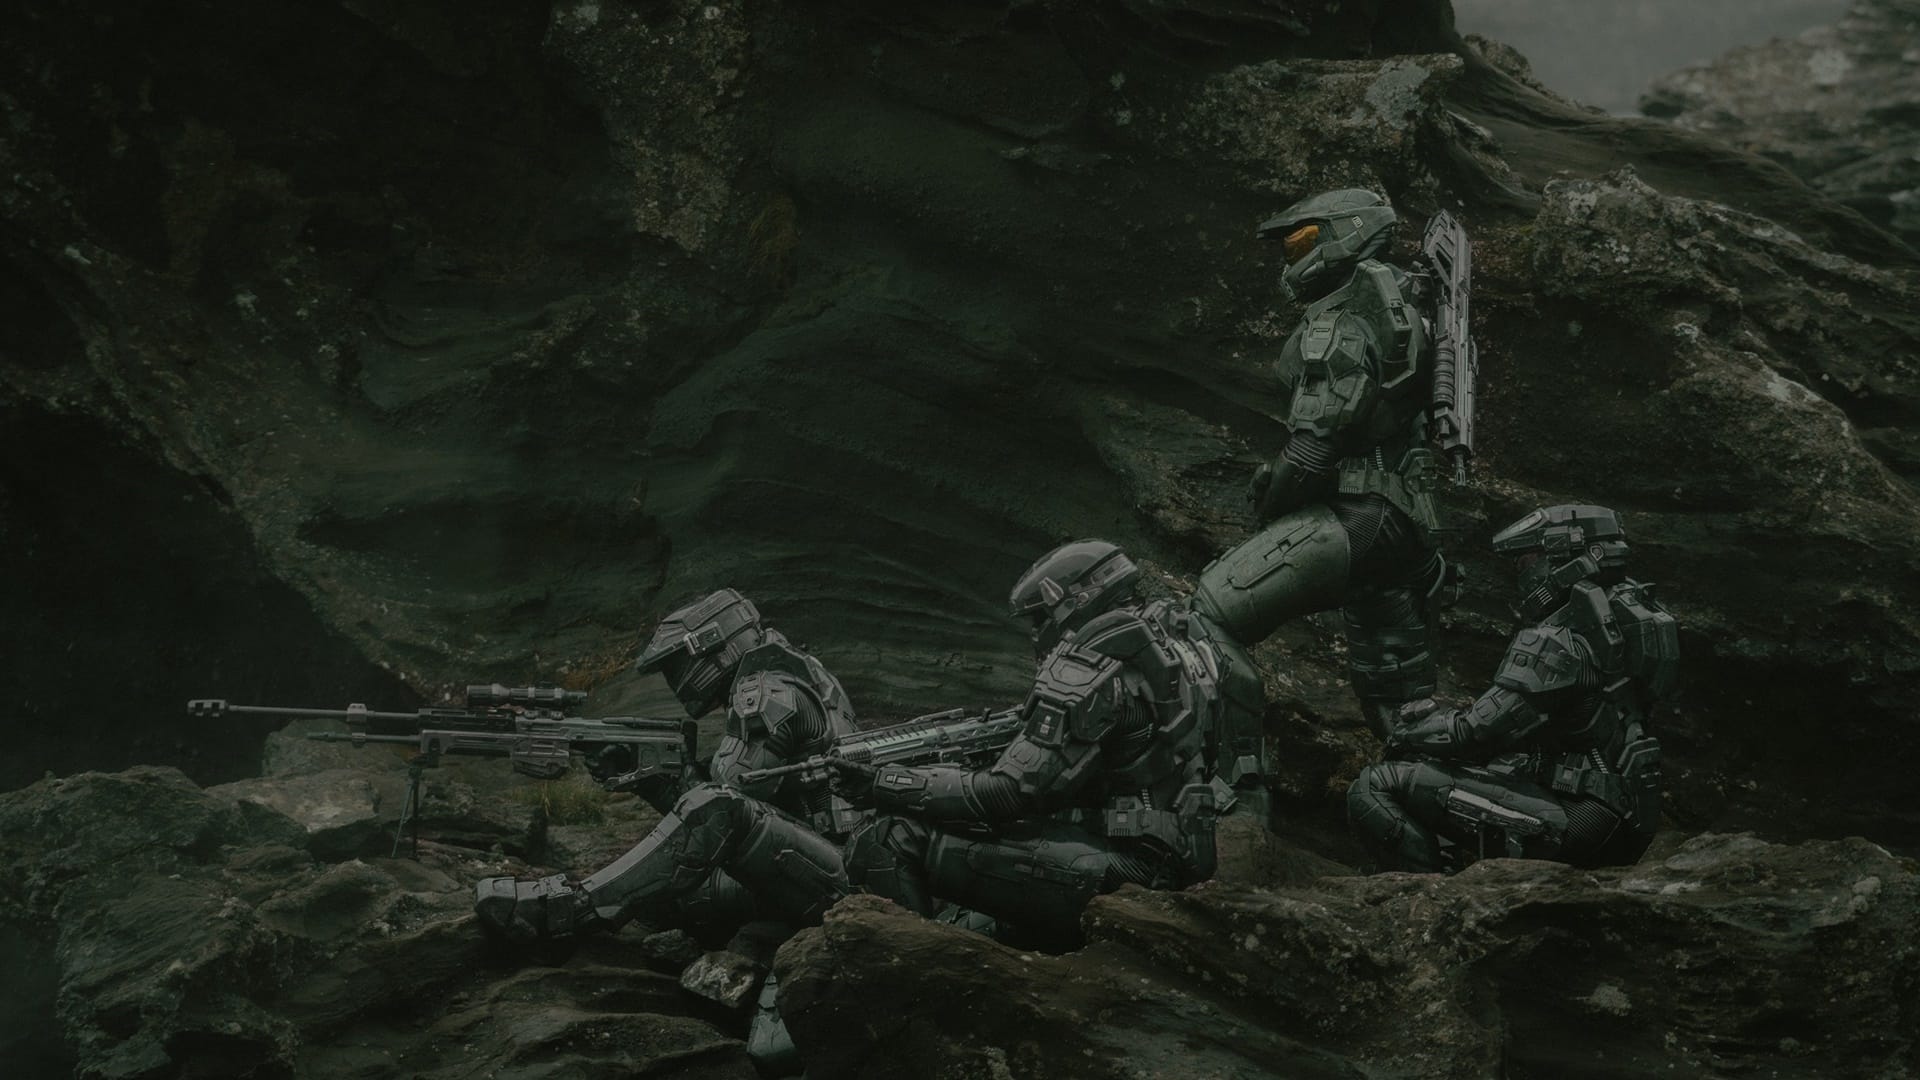 The four Spartans perched on a cliff side in the Halo Season 2 premiere.